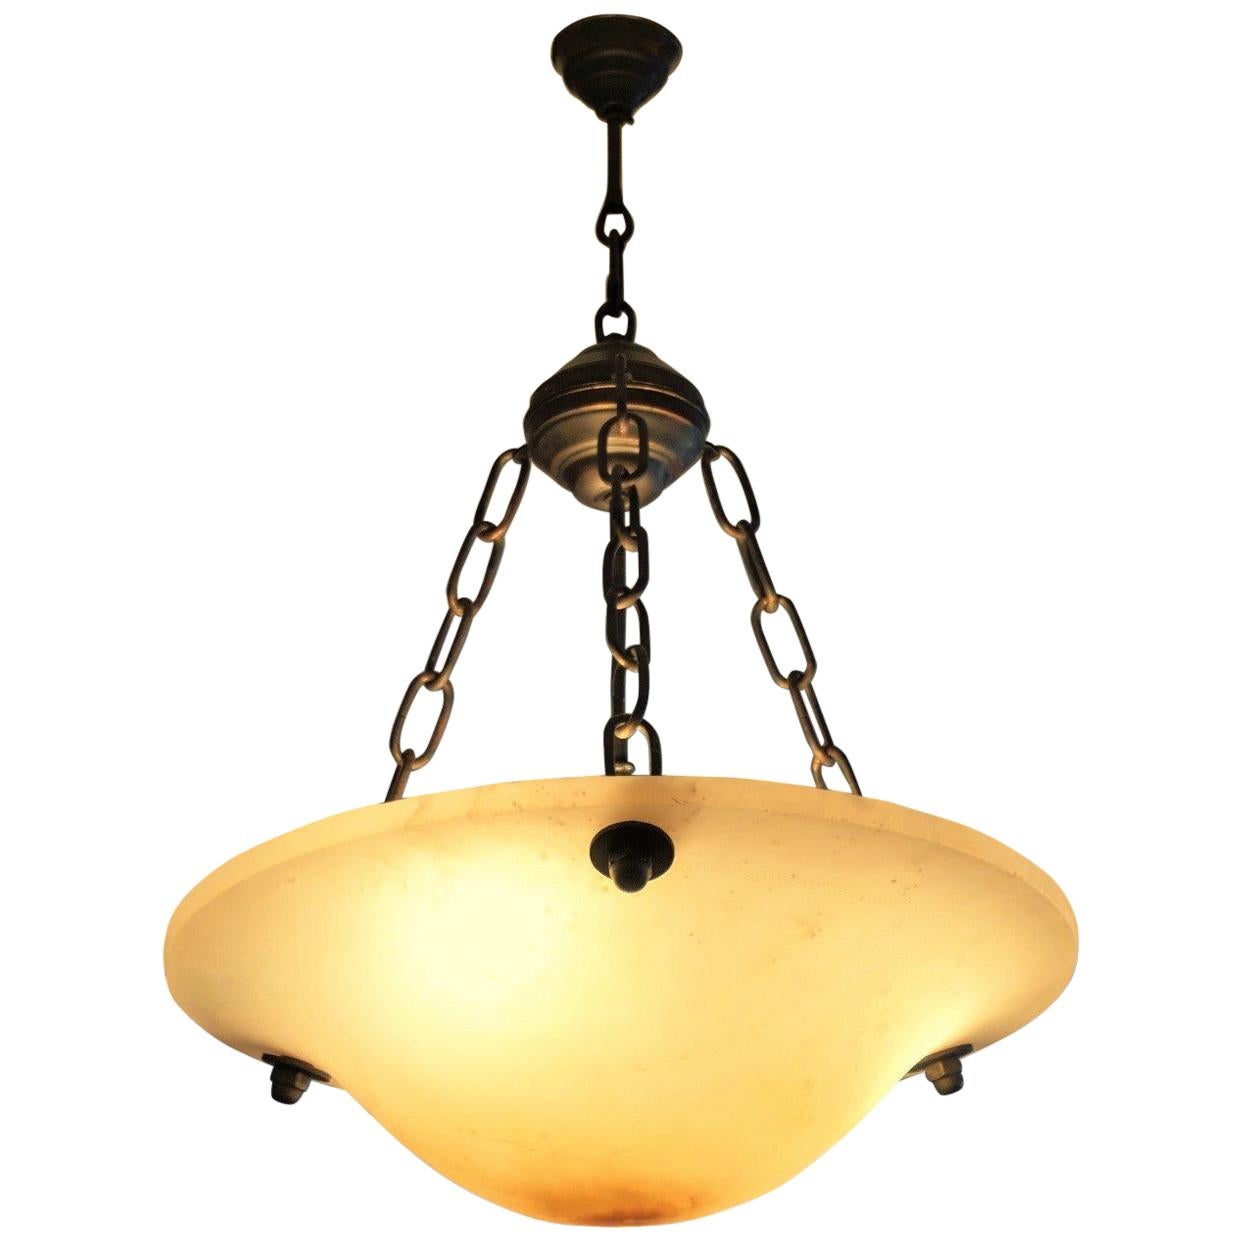 Midcentury large Art Deco carved alabaster and burnished brass chandelier with solid iron chains, in the centre three E27 light bulb holders.

Measures:
Height 29.50 in (75 cm)
Diameter 20 in (50.5 cm).

 